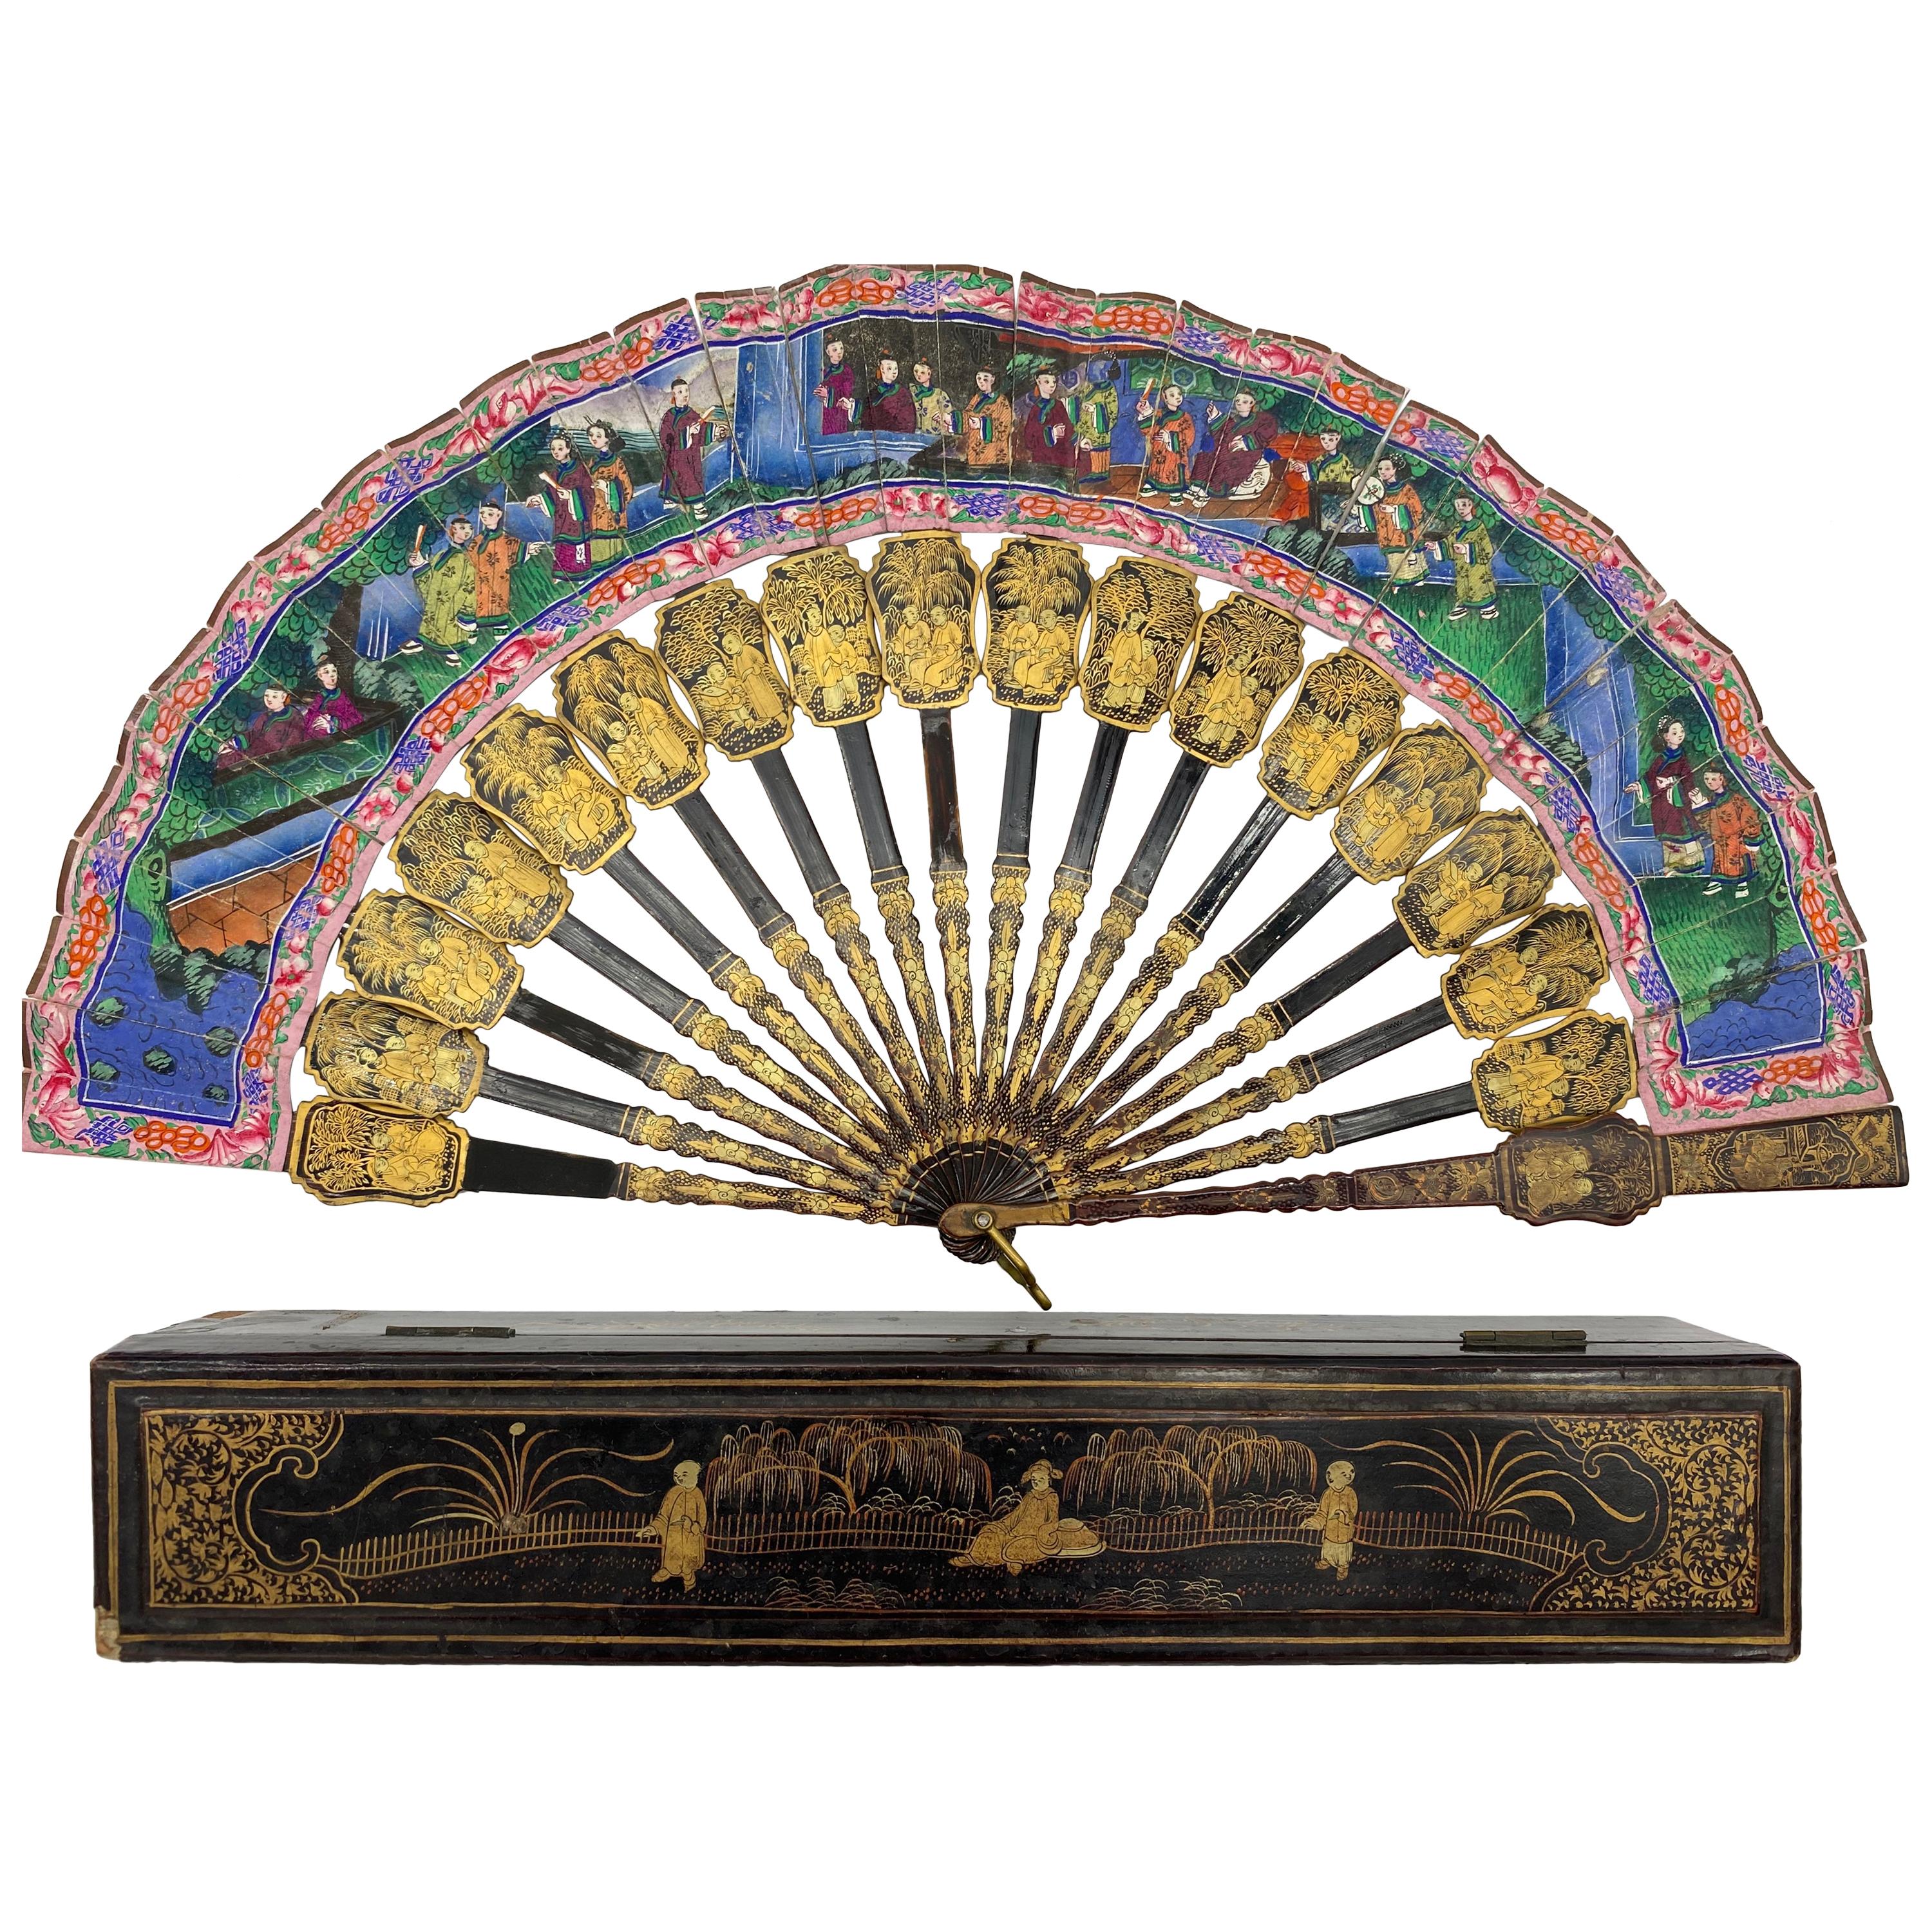 19th Century Chinese Gilt Lacquer Fan with Mother of Pearl Faces and Lacquer Box